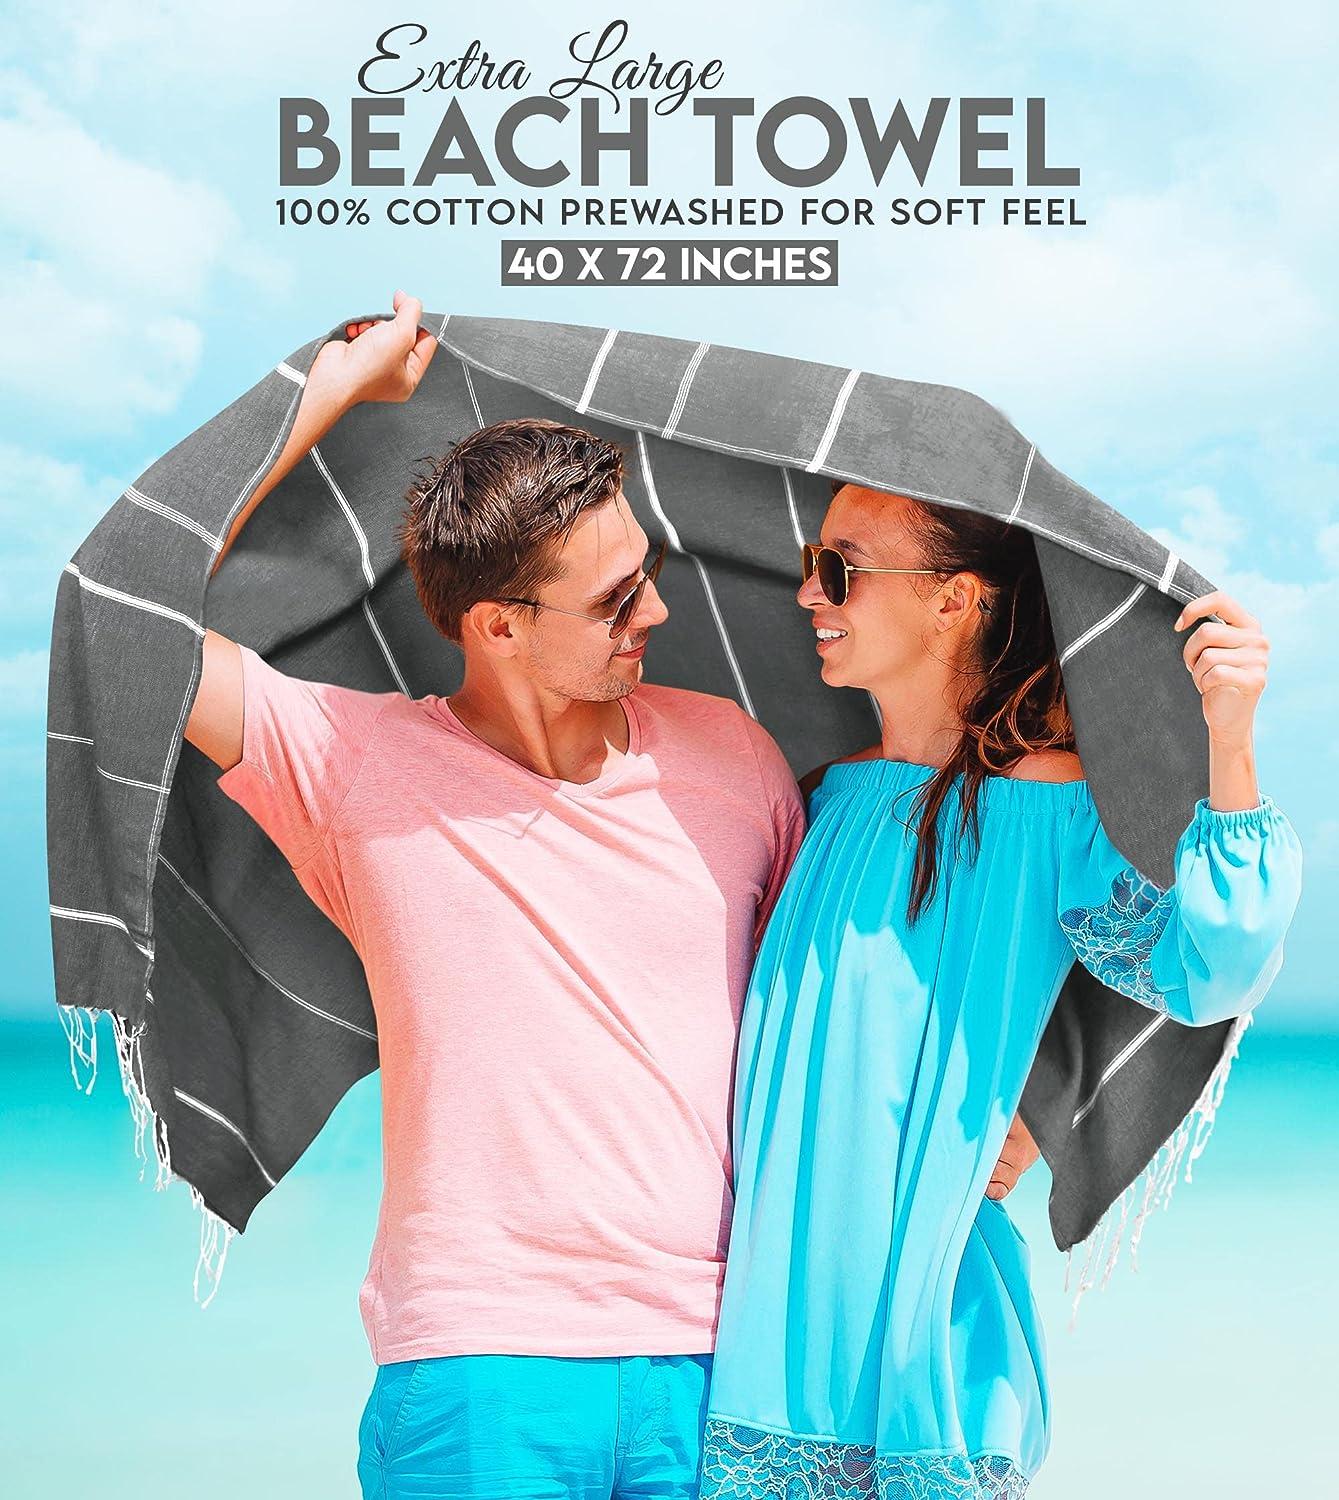 The Utopia Towels Beach Towels Are on Sale at